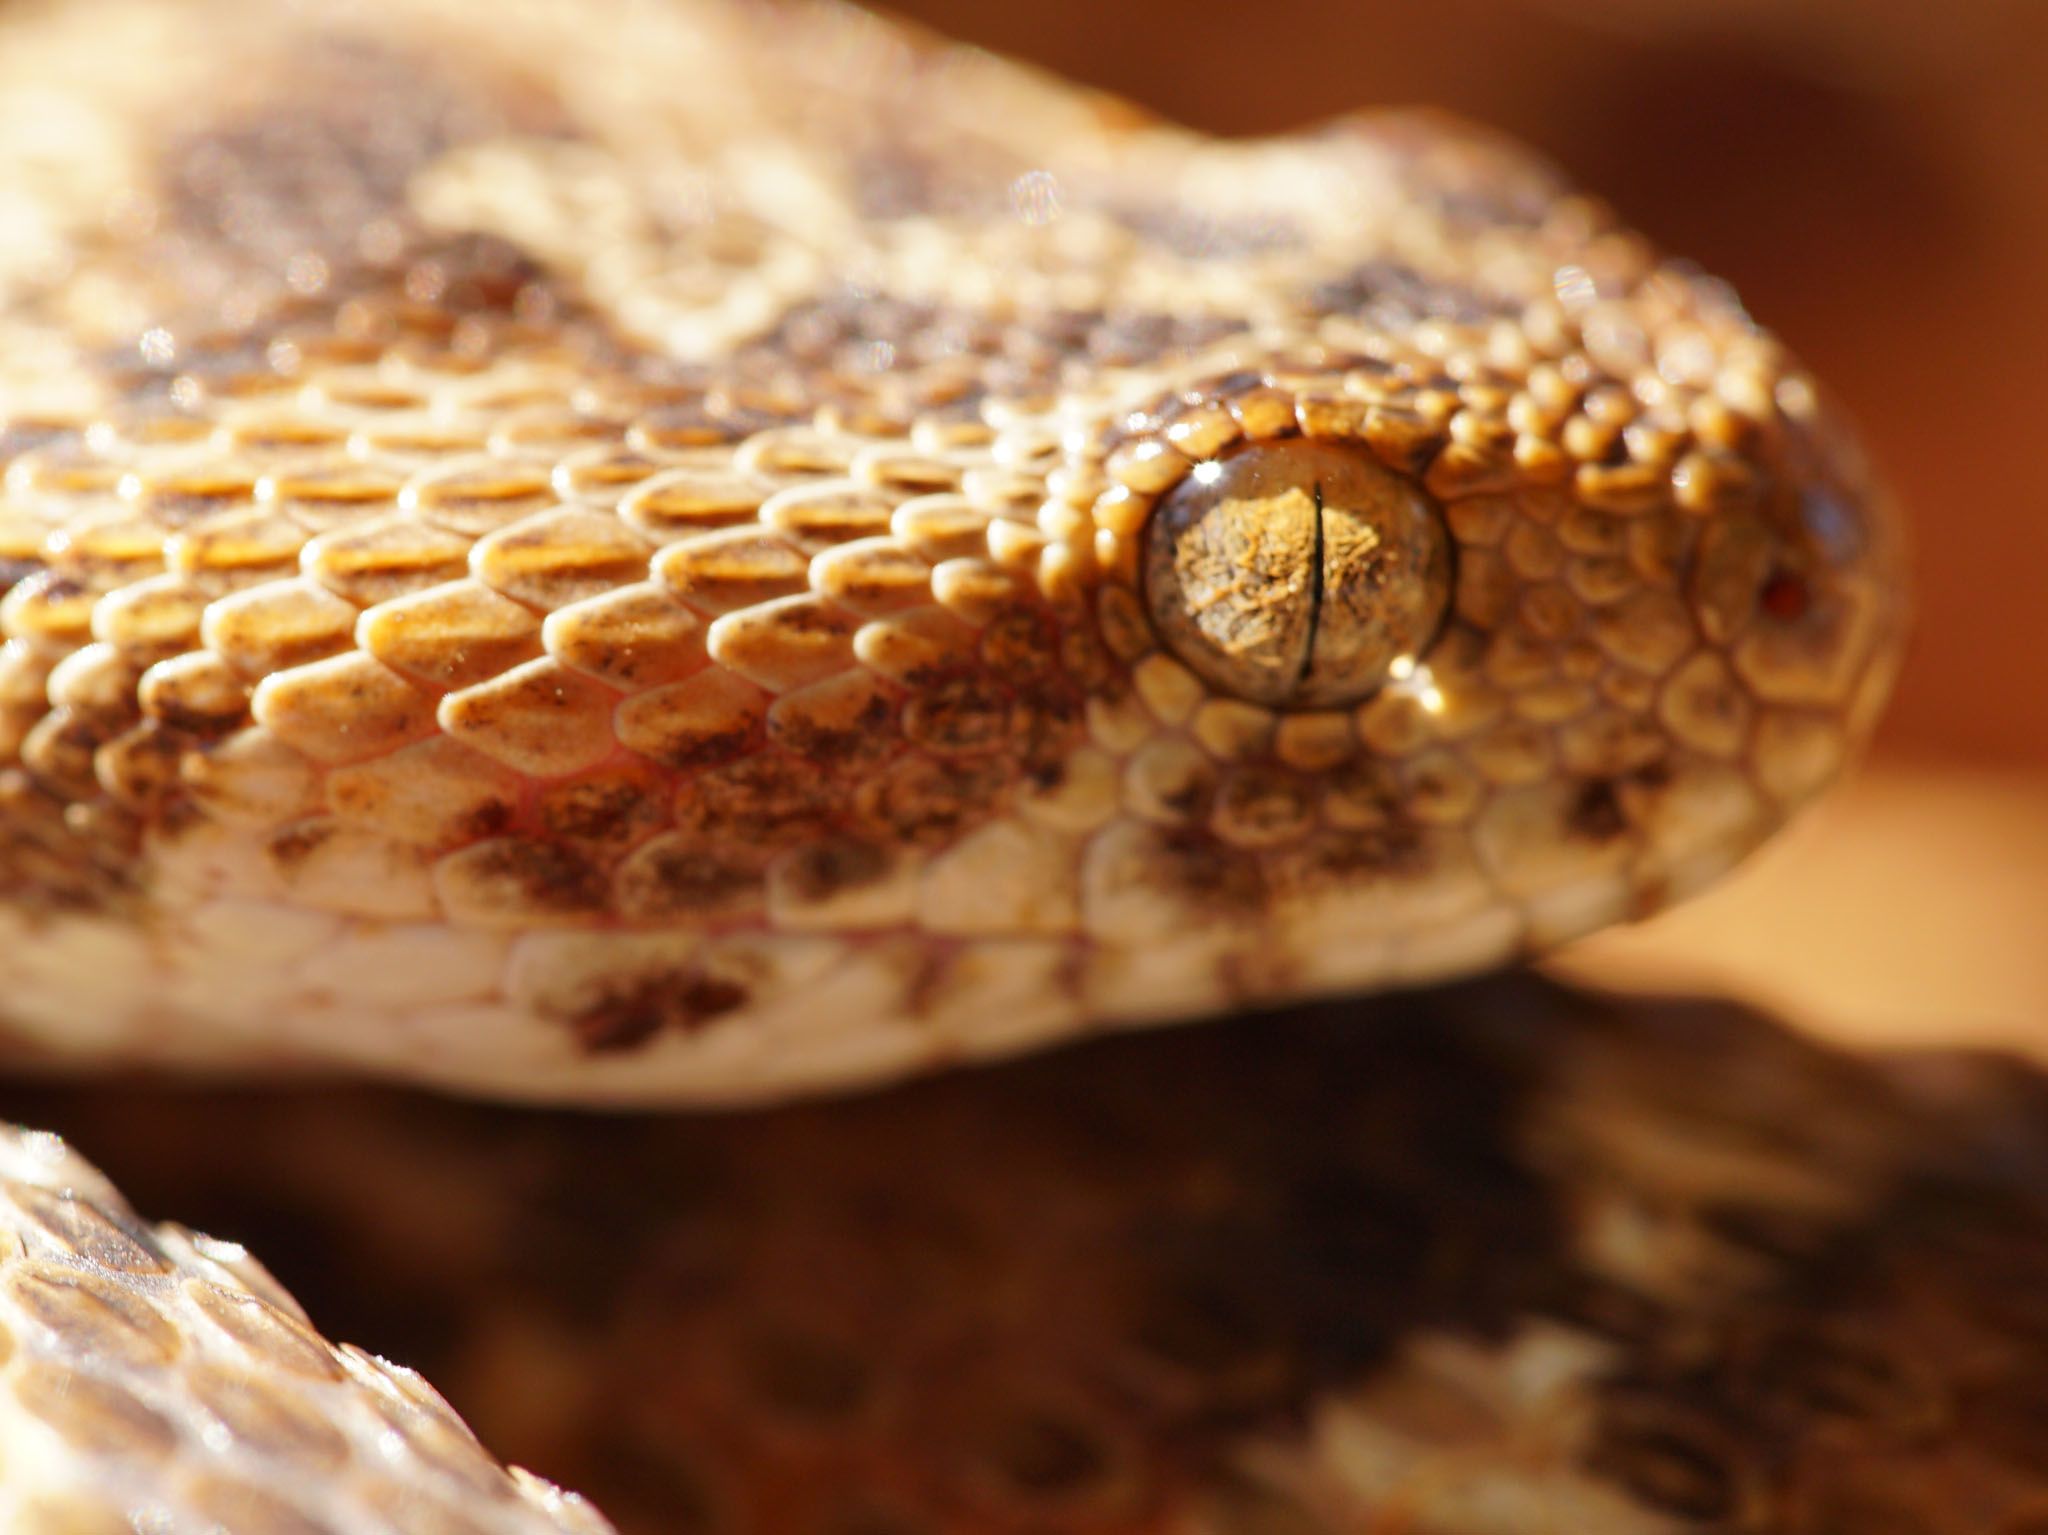 A saw-scaled viper (Echis spp). This image is from World Deadliest Snakes. [Photo of the day - March 2021]